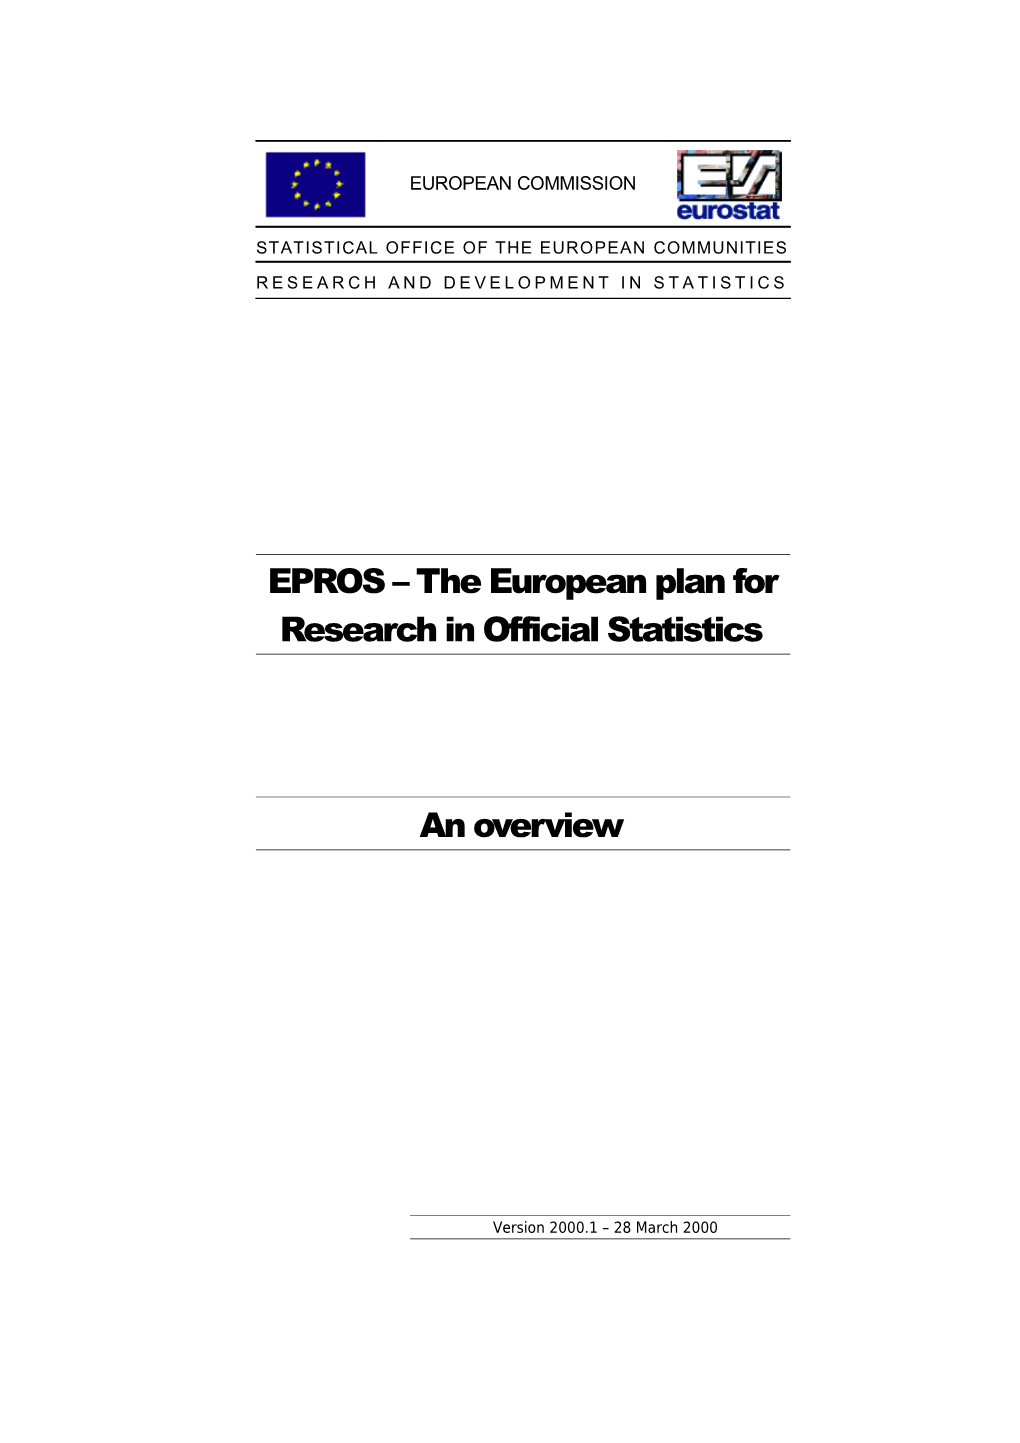 EPROS the European Plan for Research in Official Statistics